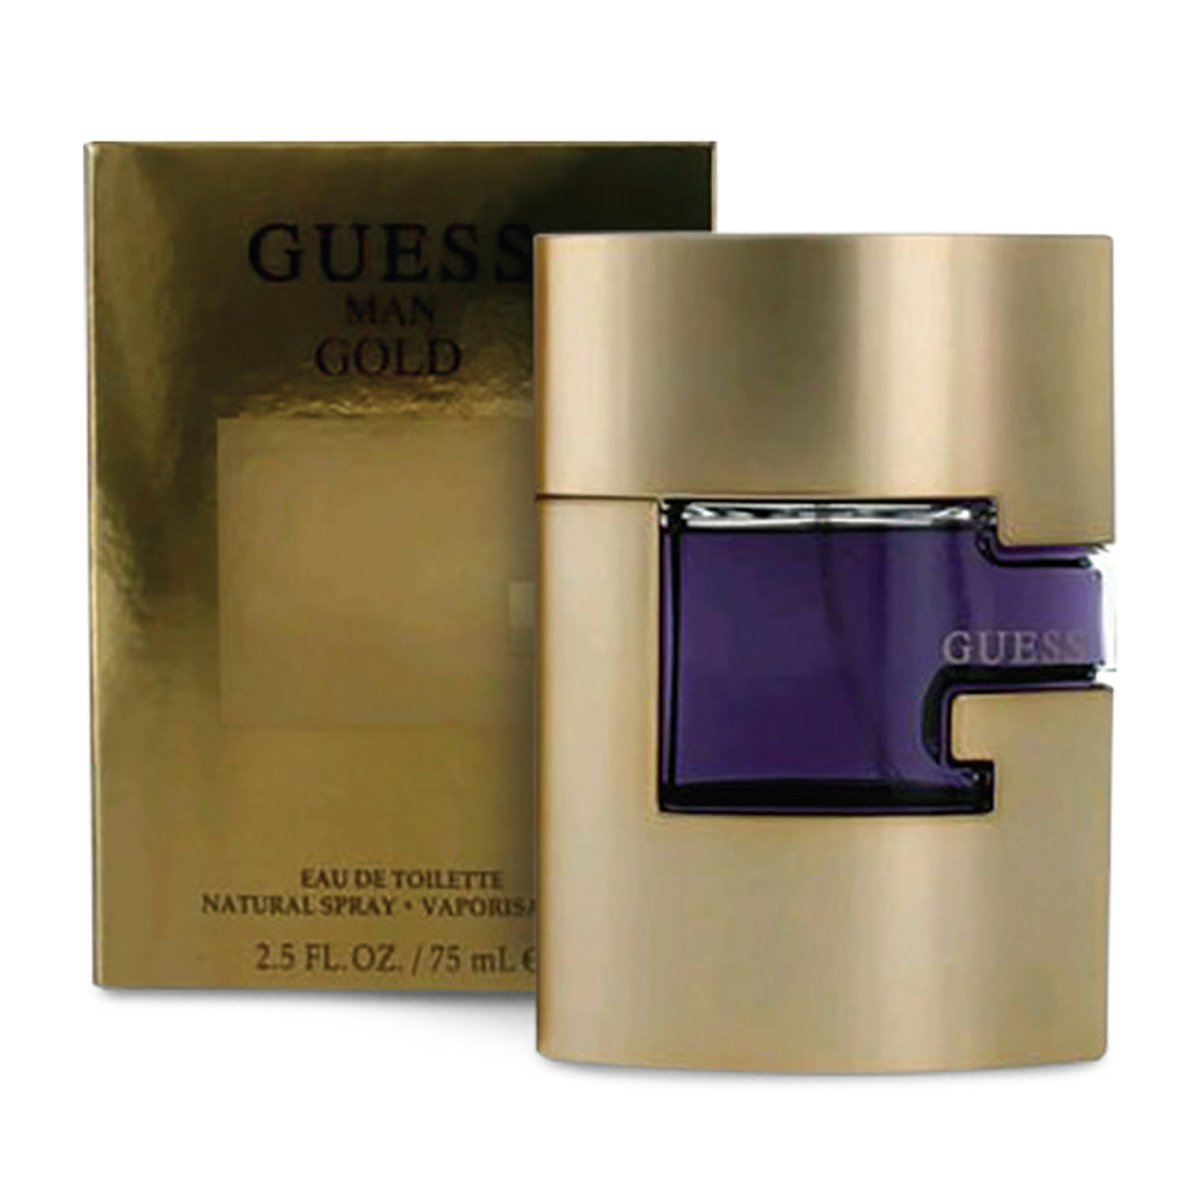 Guess Gold EDT For Men 75ml